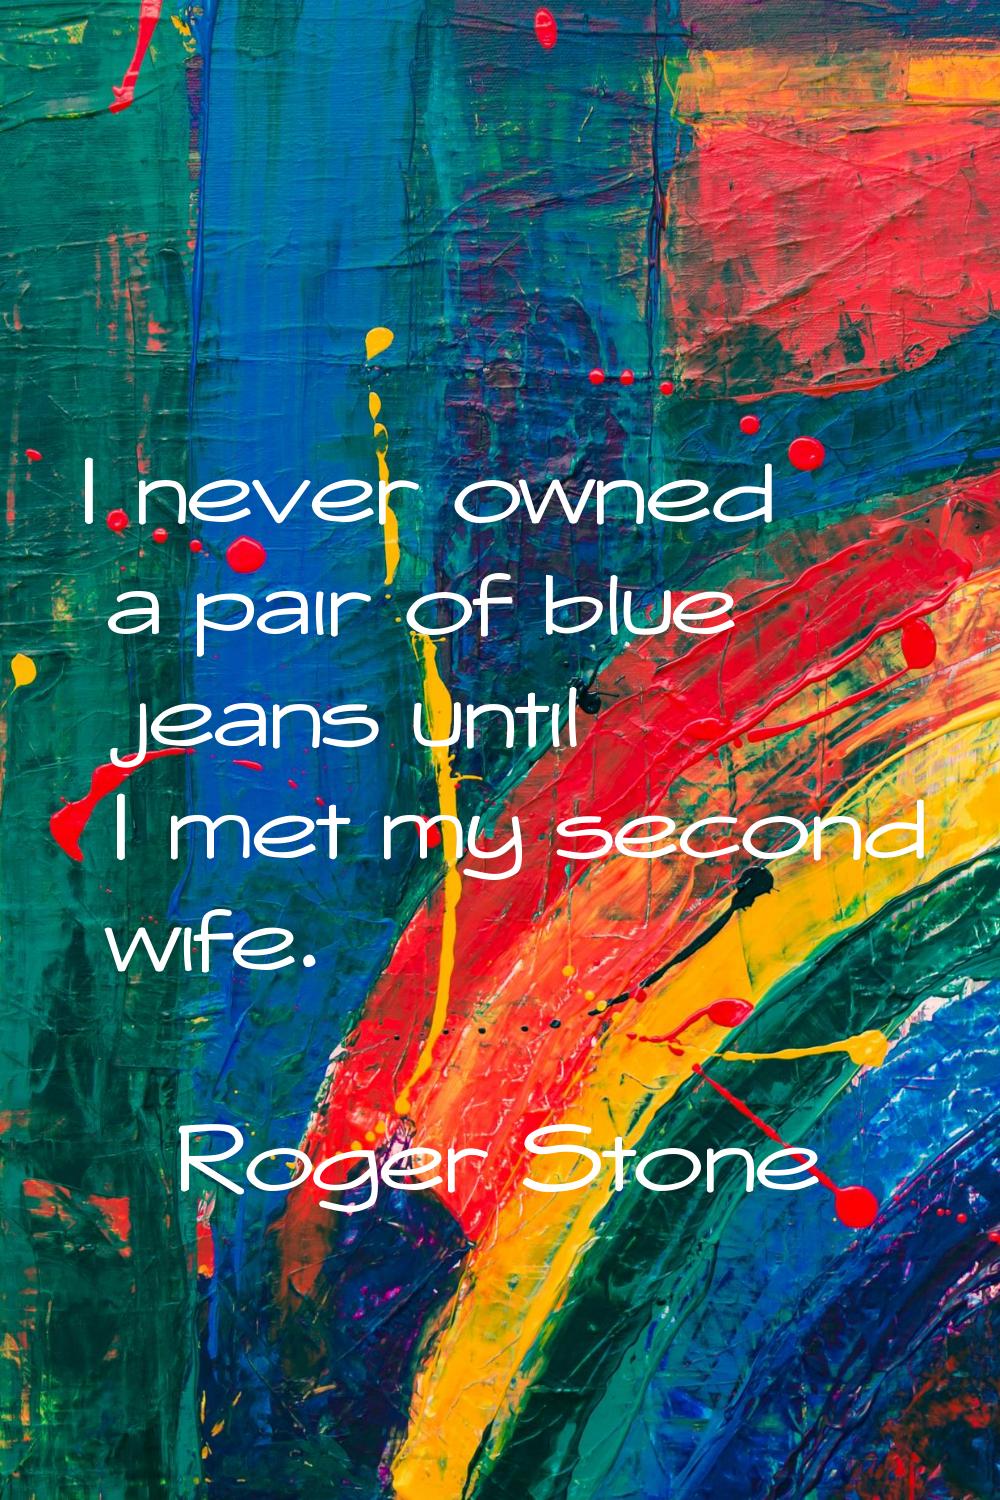 I never owned a pair of blue jeans until I met my second wife.